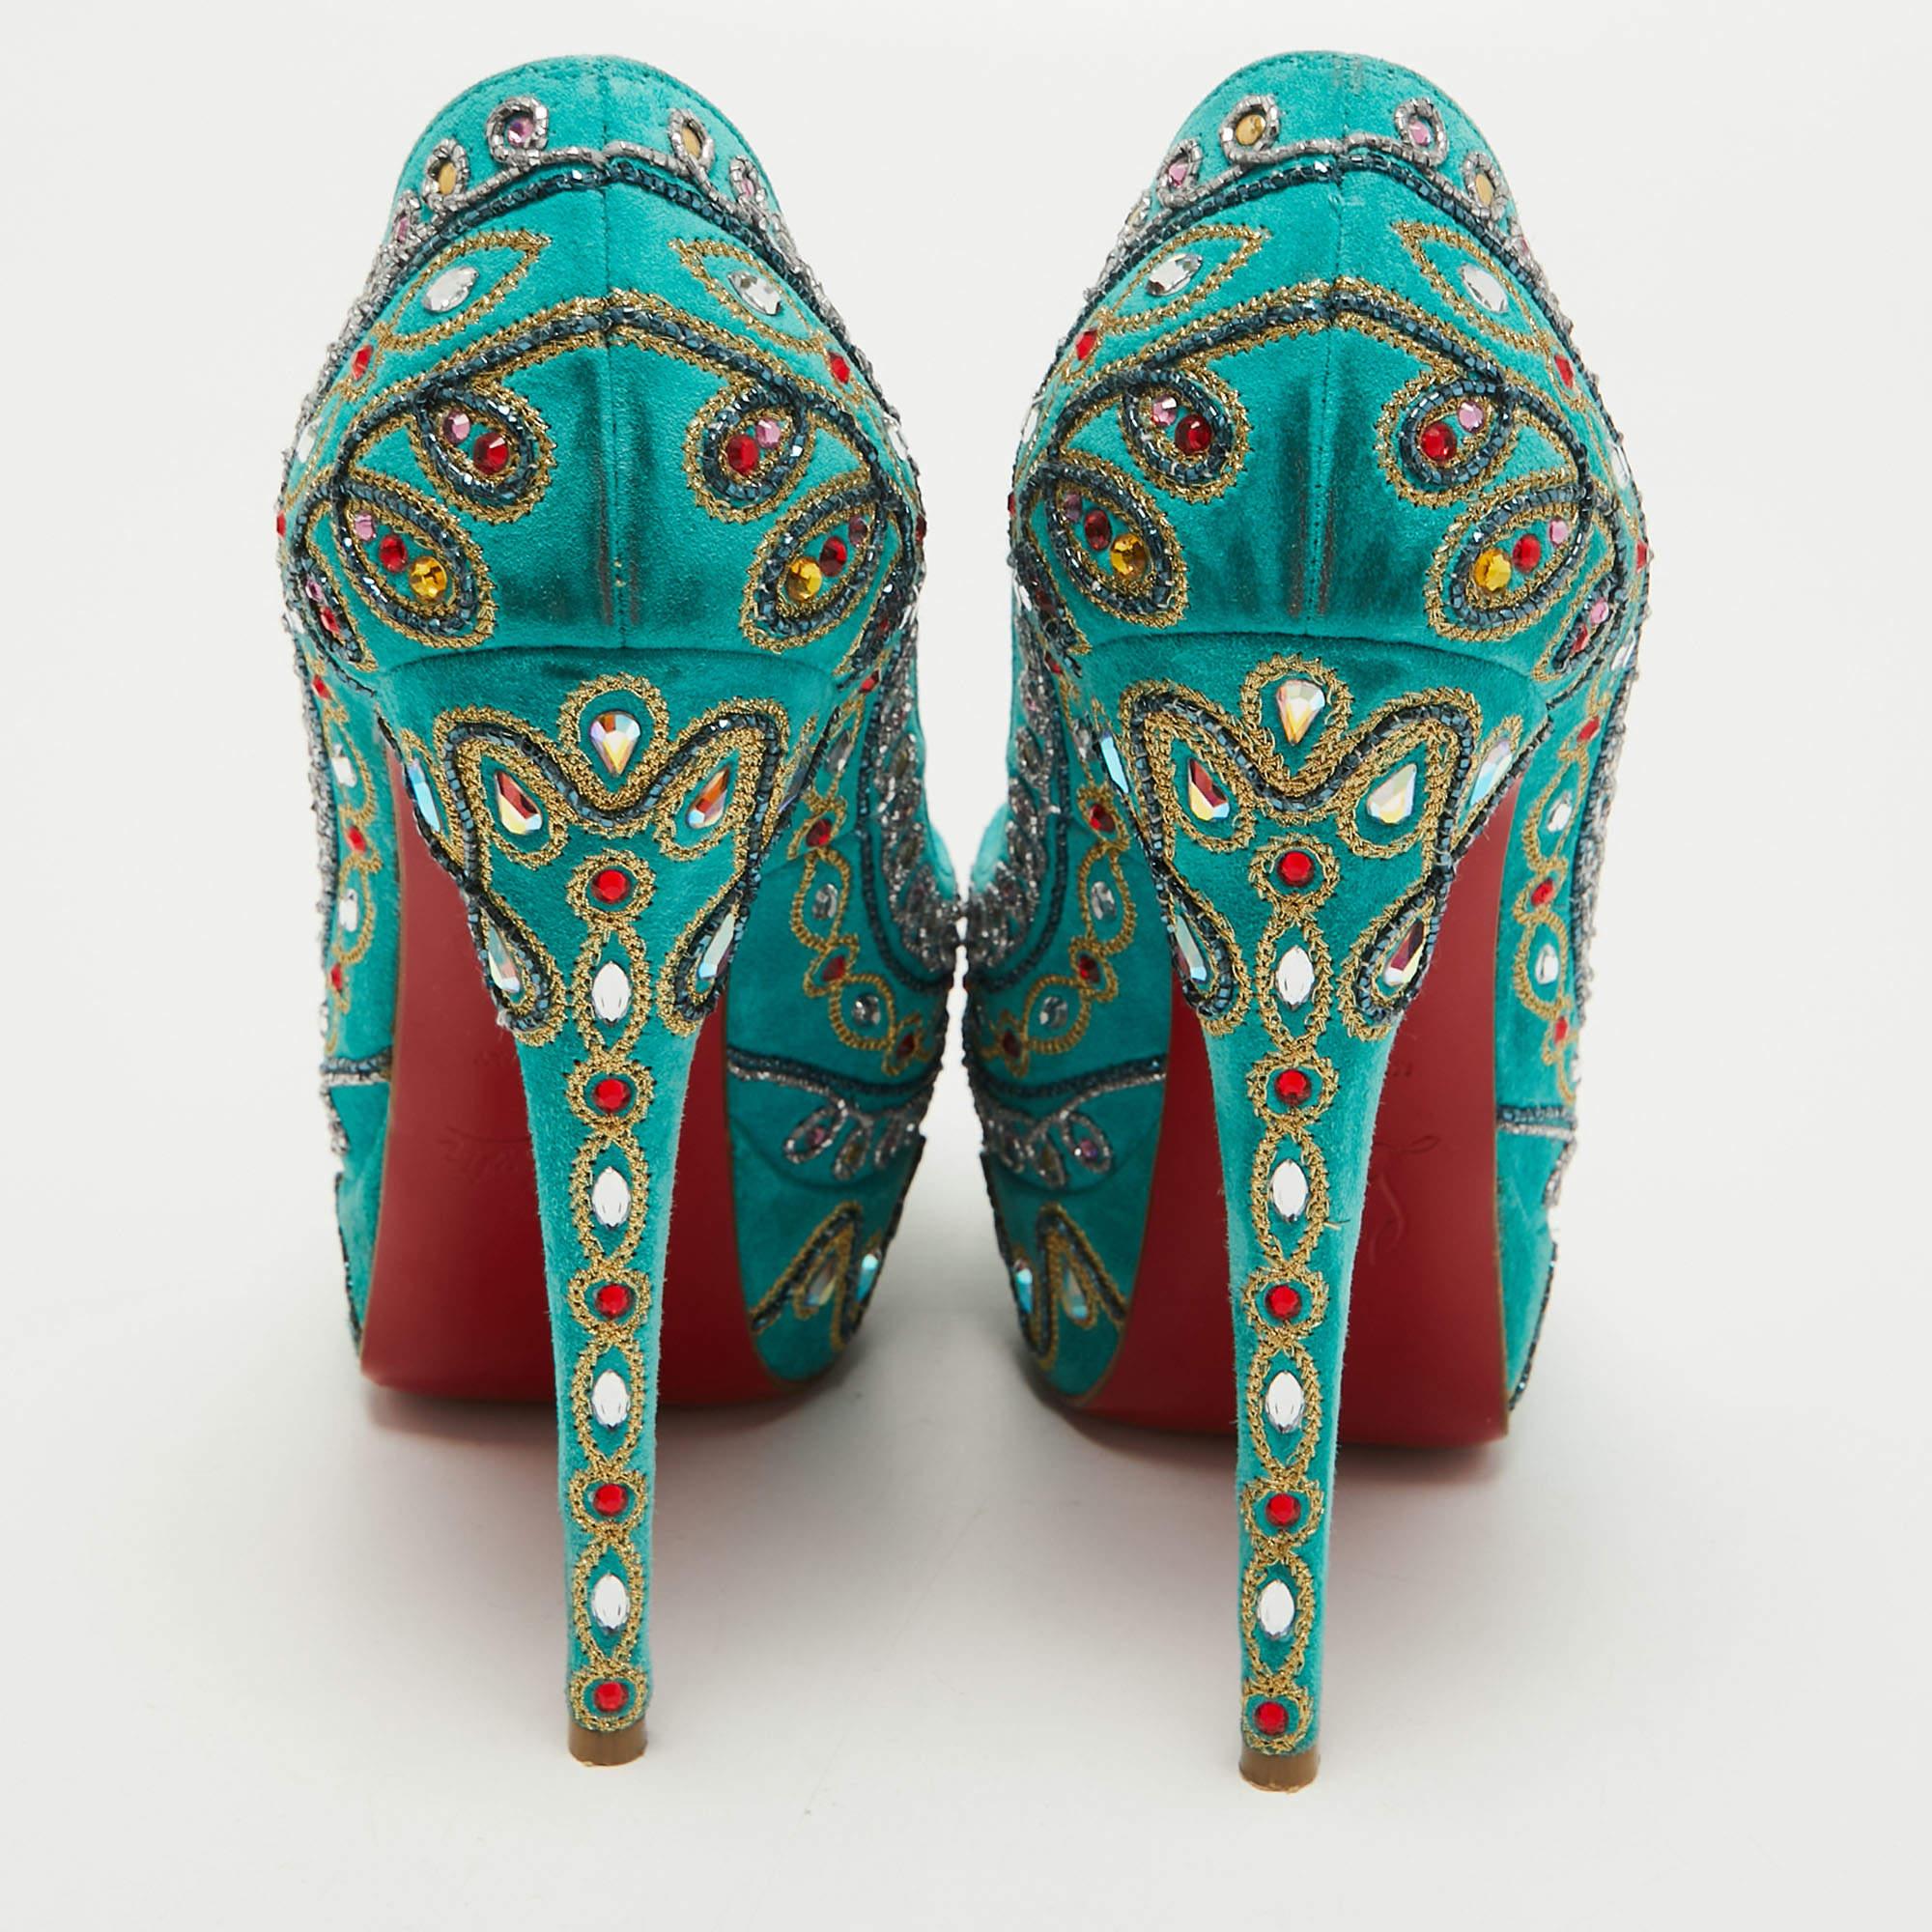 Christian Louboutin Turquoise Embellished Suede Lady Peep Pumps Size 37 1